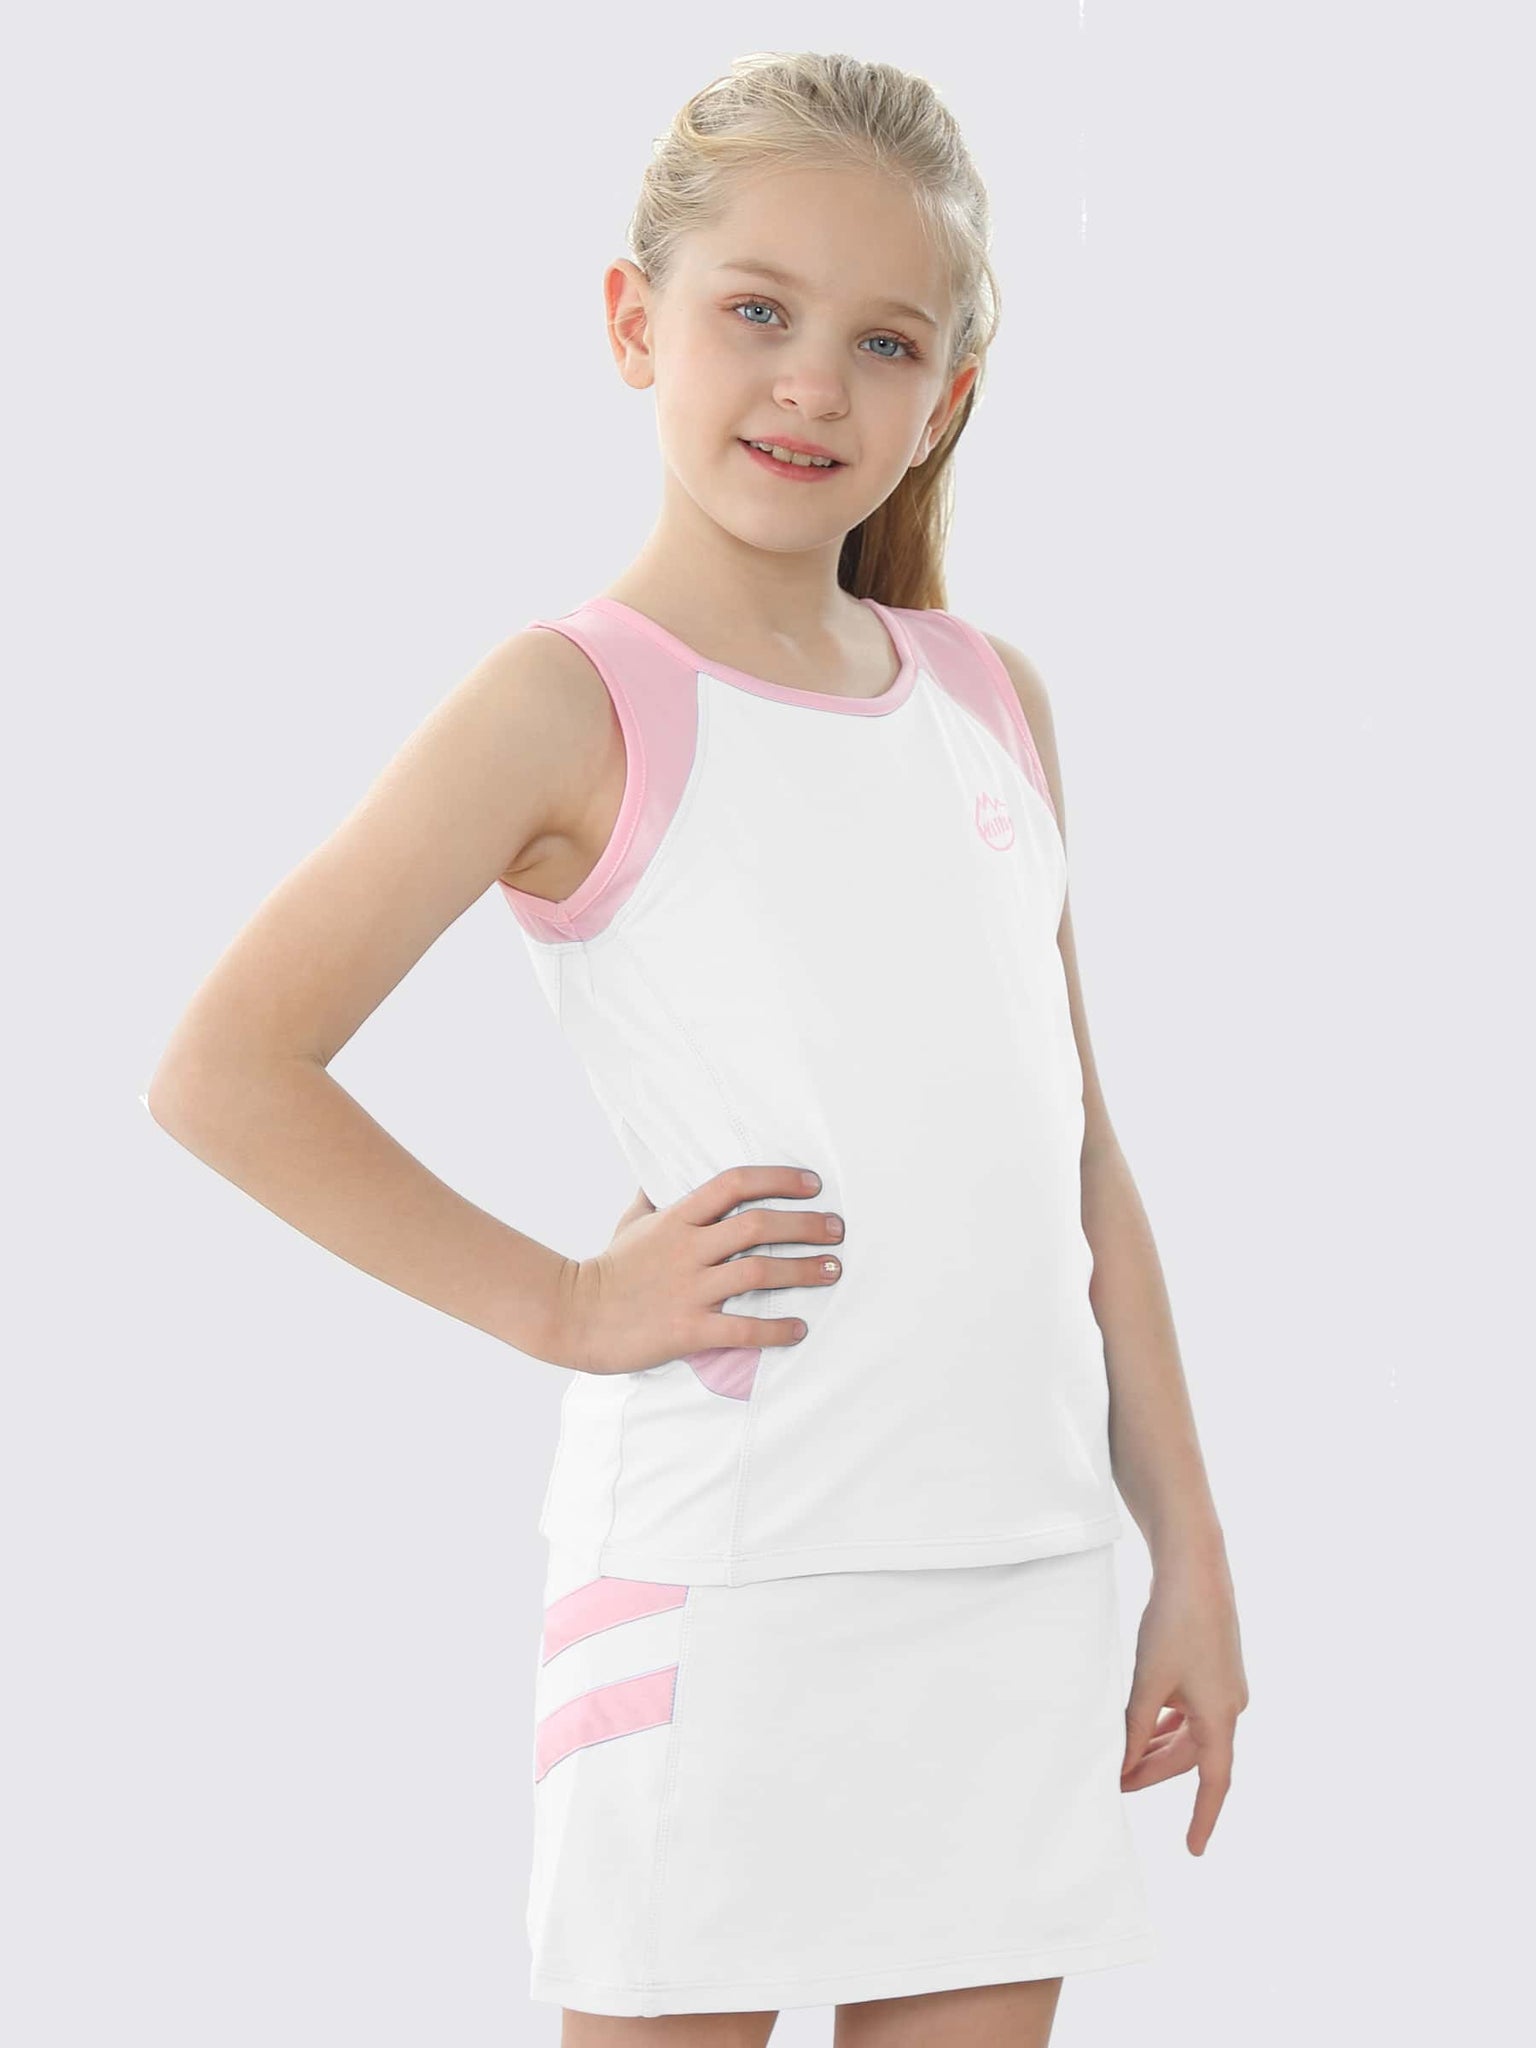 Willit Girls' Tennis Outfit_White_model2